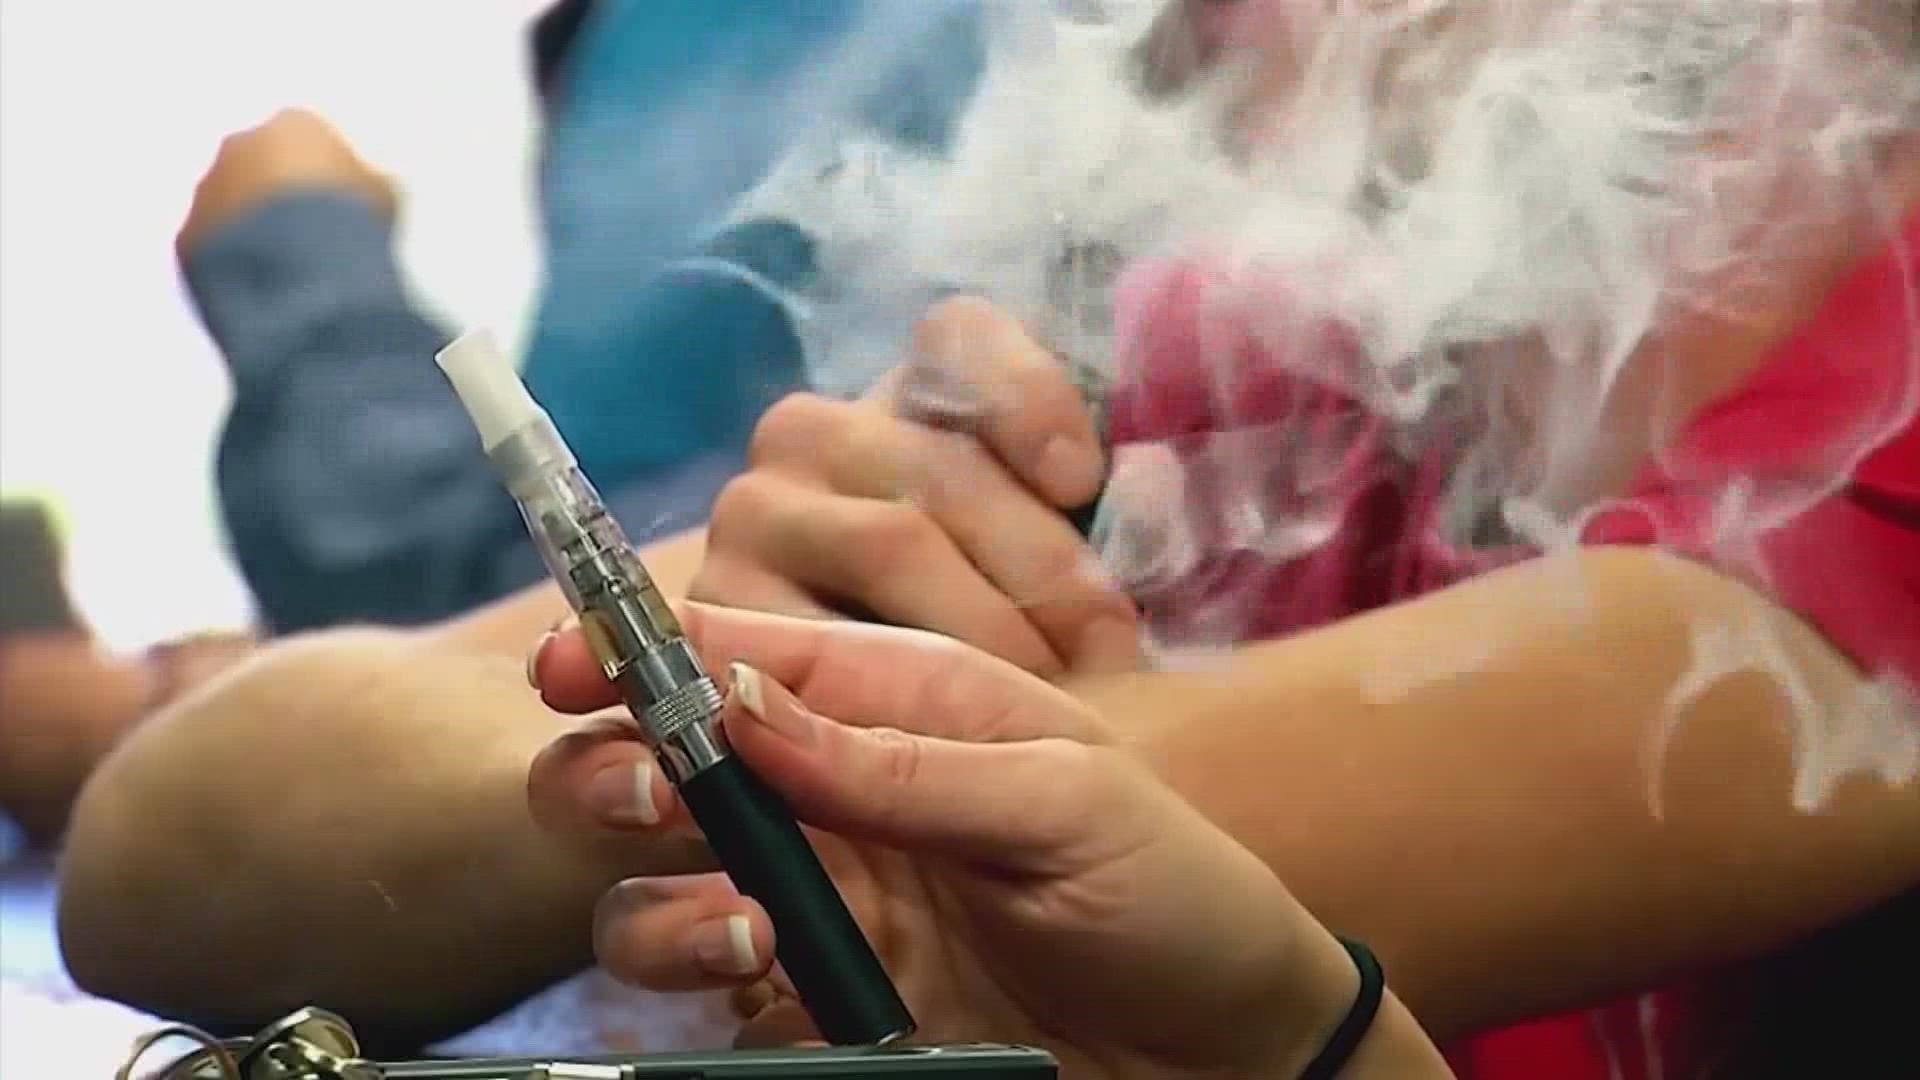 A unanimous vote from the Houston City Council approved a ban on the use of e-cigarettes in most public places.